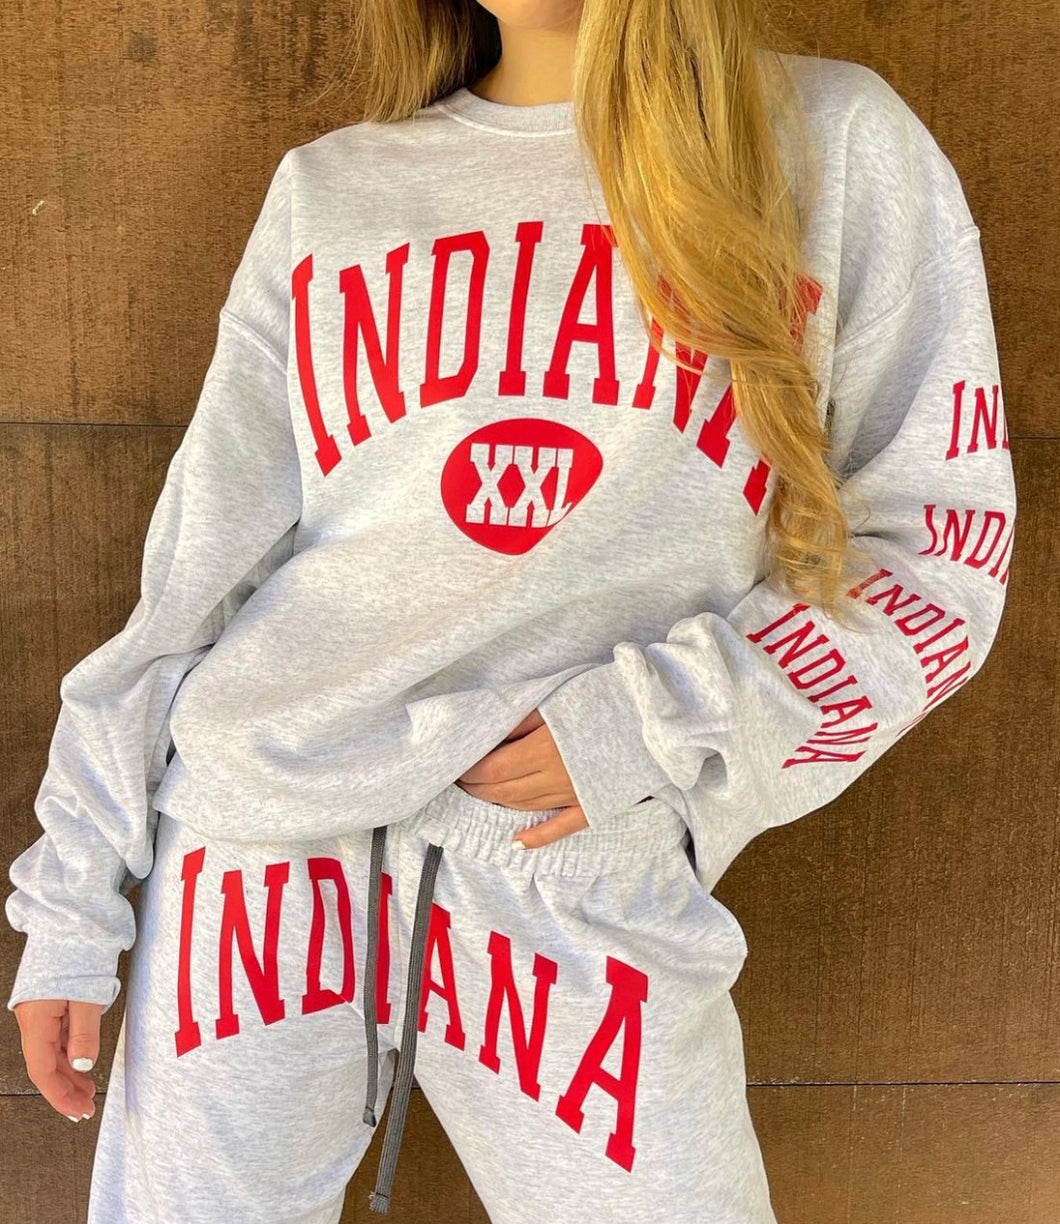 Custom college big front sweatshirt(can make for any school) matching sweatshirt sold separately